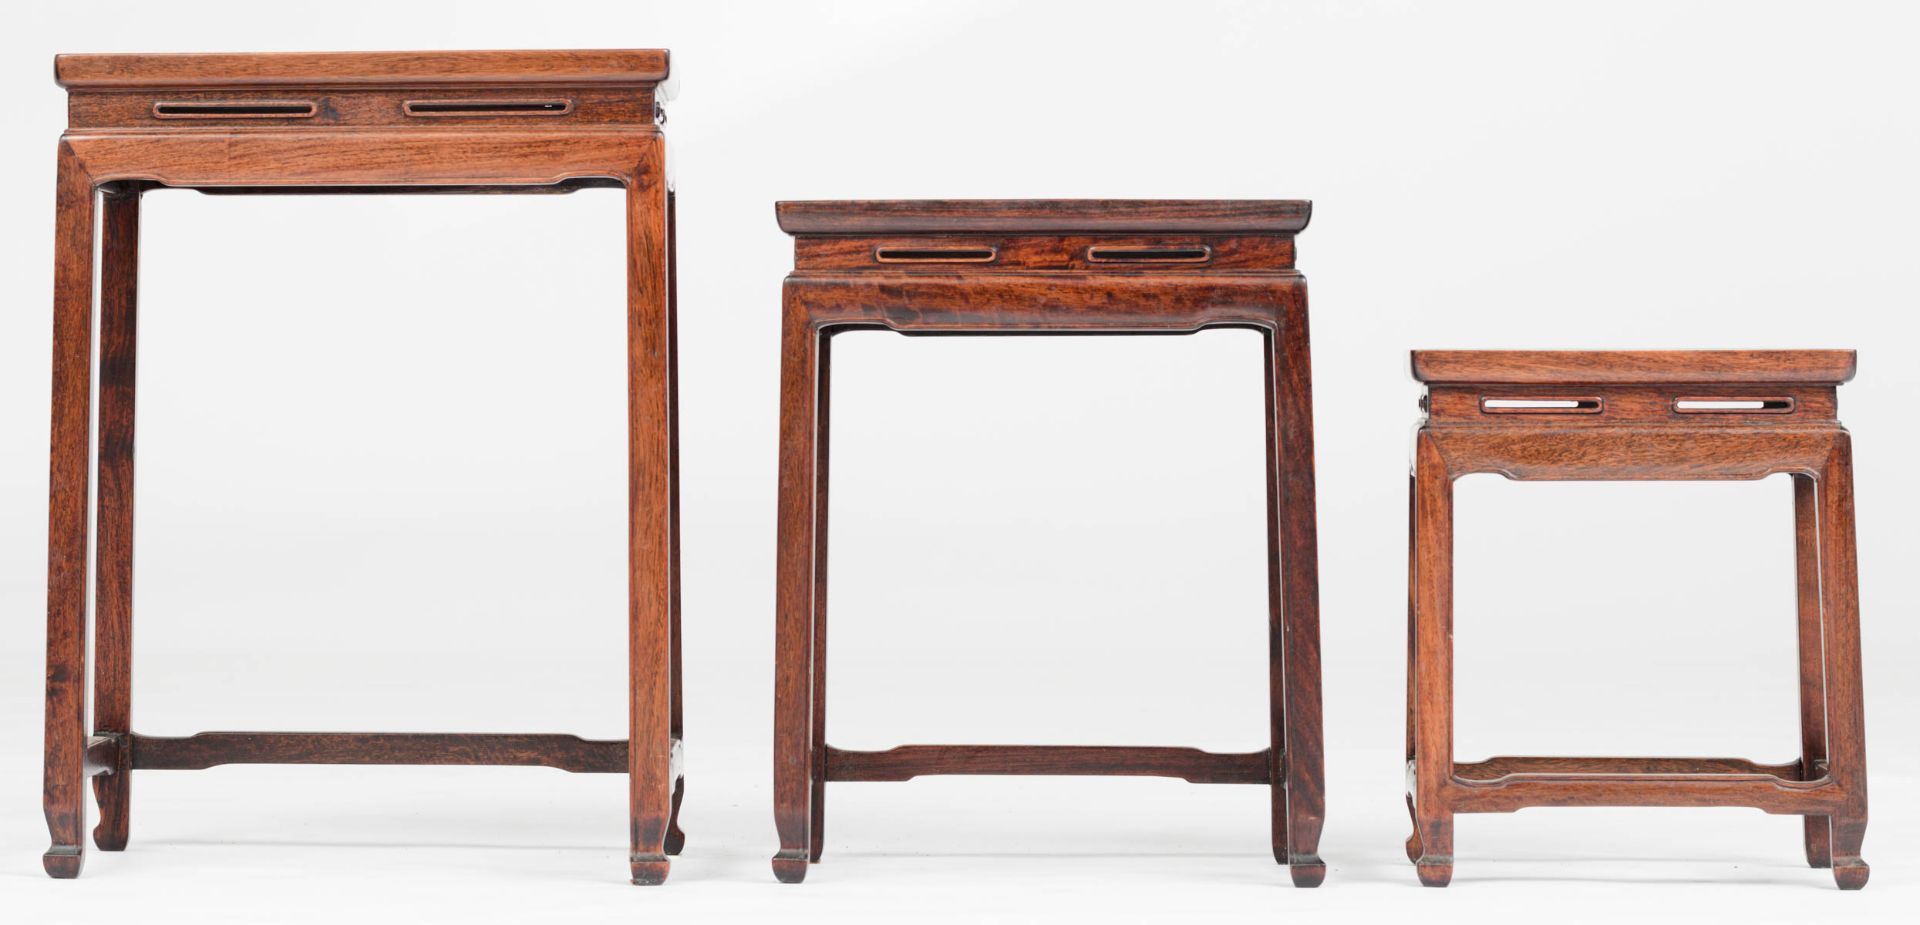 A three piece set of Chinese exotic hardwood matching occasional tables - Image 2 of 7